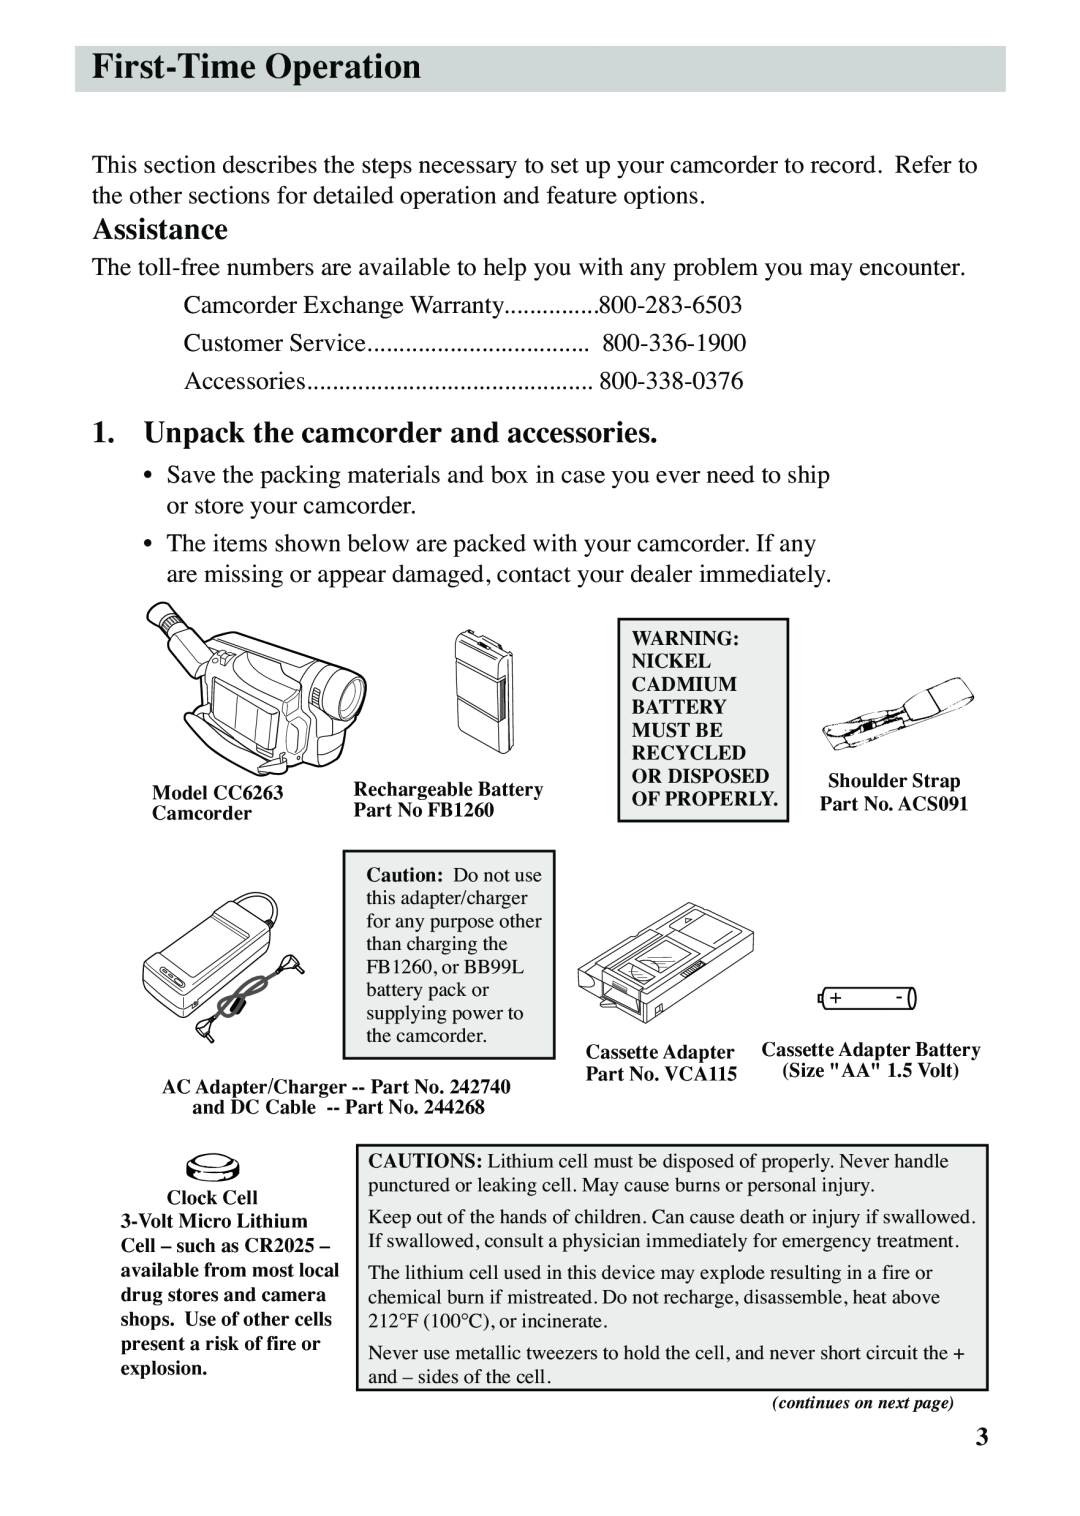 RCA CC6263 manual First-Time Operation, Assistance, Unpack the camcorder and accessories 